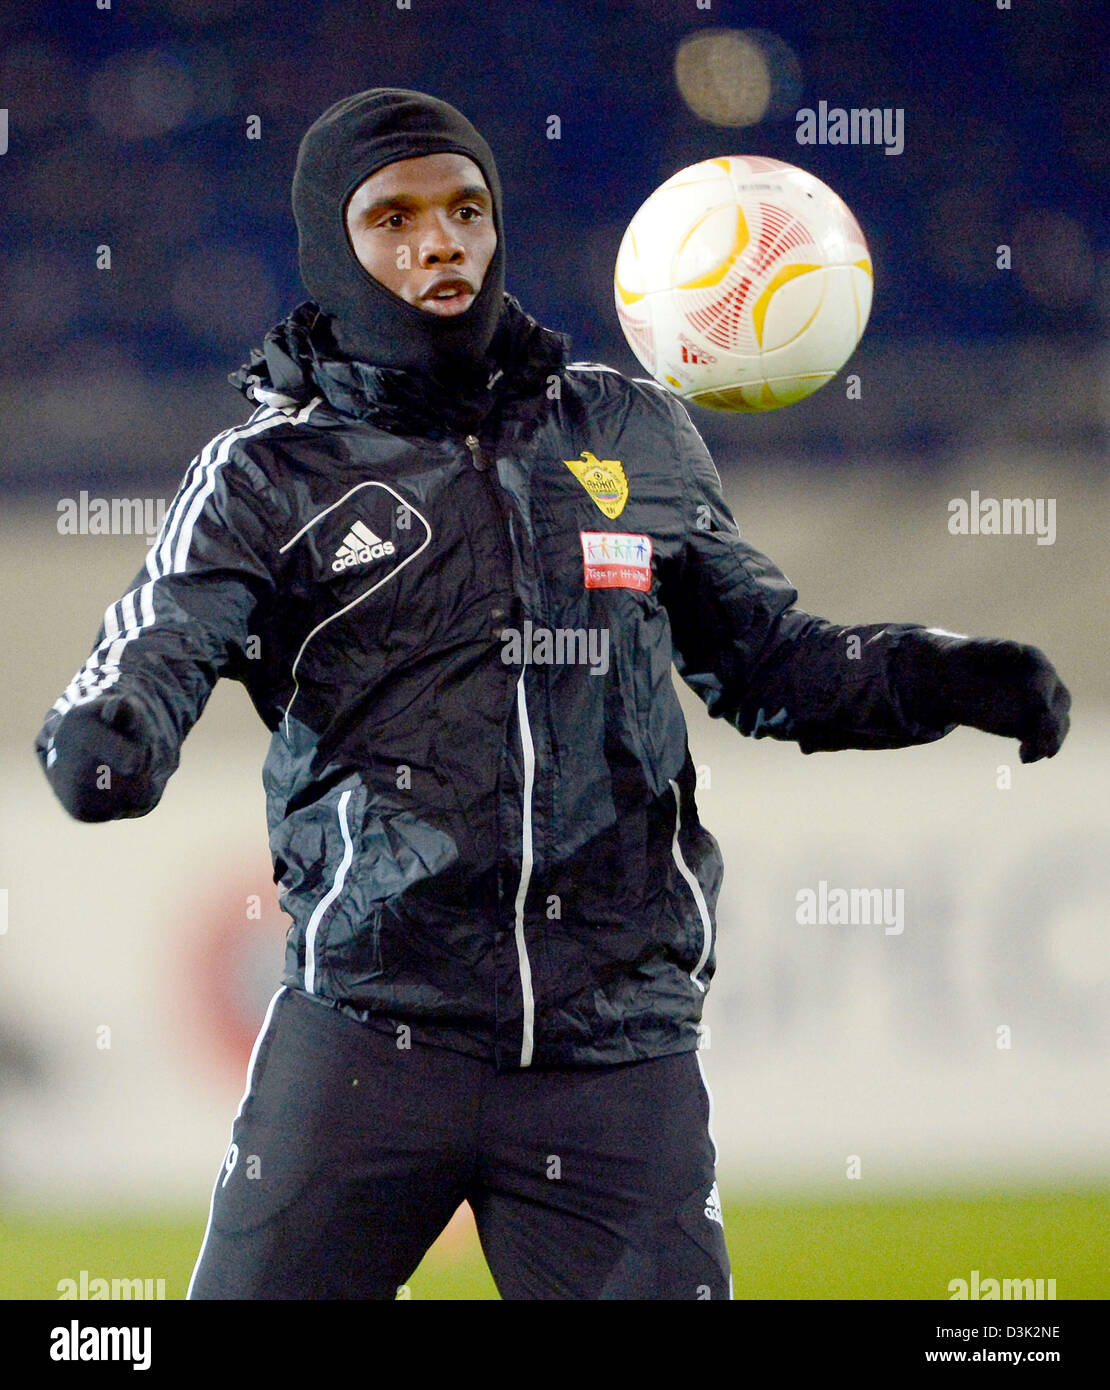 Player of soccer club FC Anzhi Makhachkala, Samuel Eto'o, plays the ball during a training session for the Europa League soccer match between Hannover 96 at AWD Arena in Hanover, Germany, 20 February 2013. Hannover 96 will play Anzhi Makhachkala on 21 February 2013. Photo: PETER STEFFEN Stock Photo